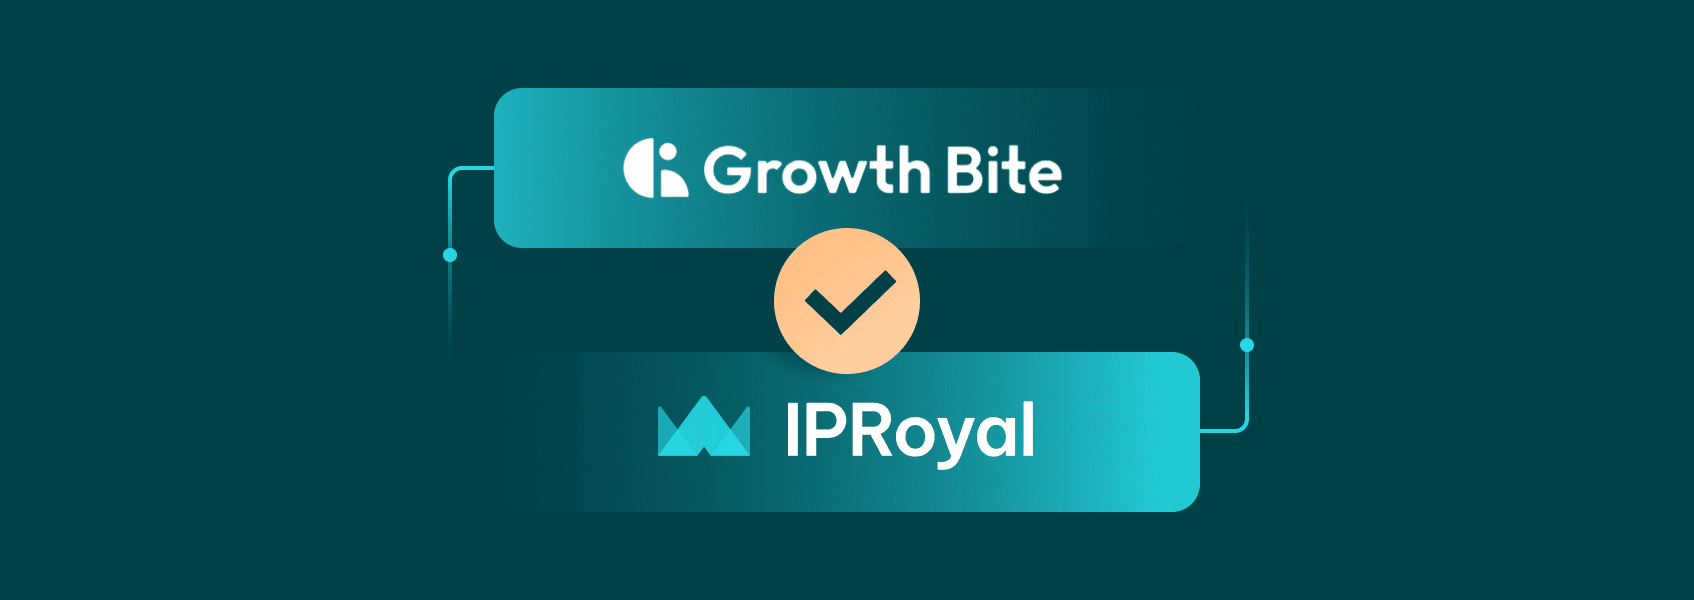 How Growth Bite Uses IPRoyal to Enhance Marketing Services and Drive Growth